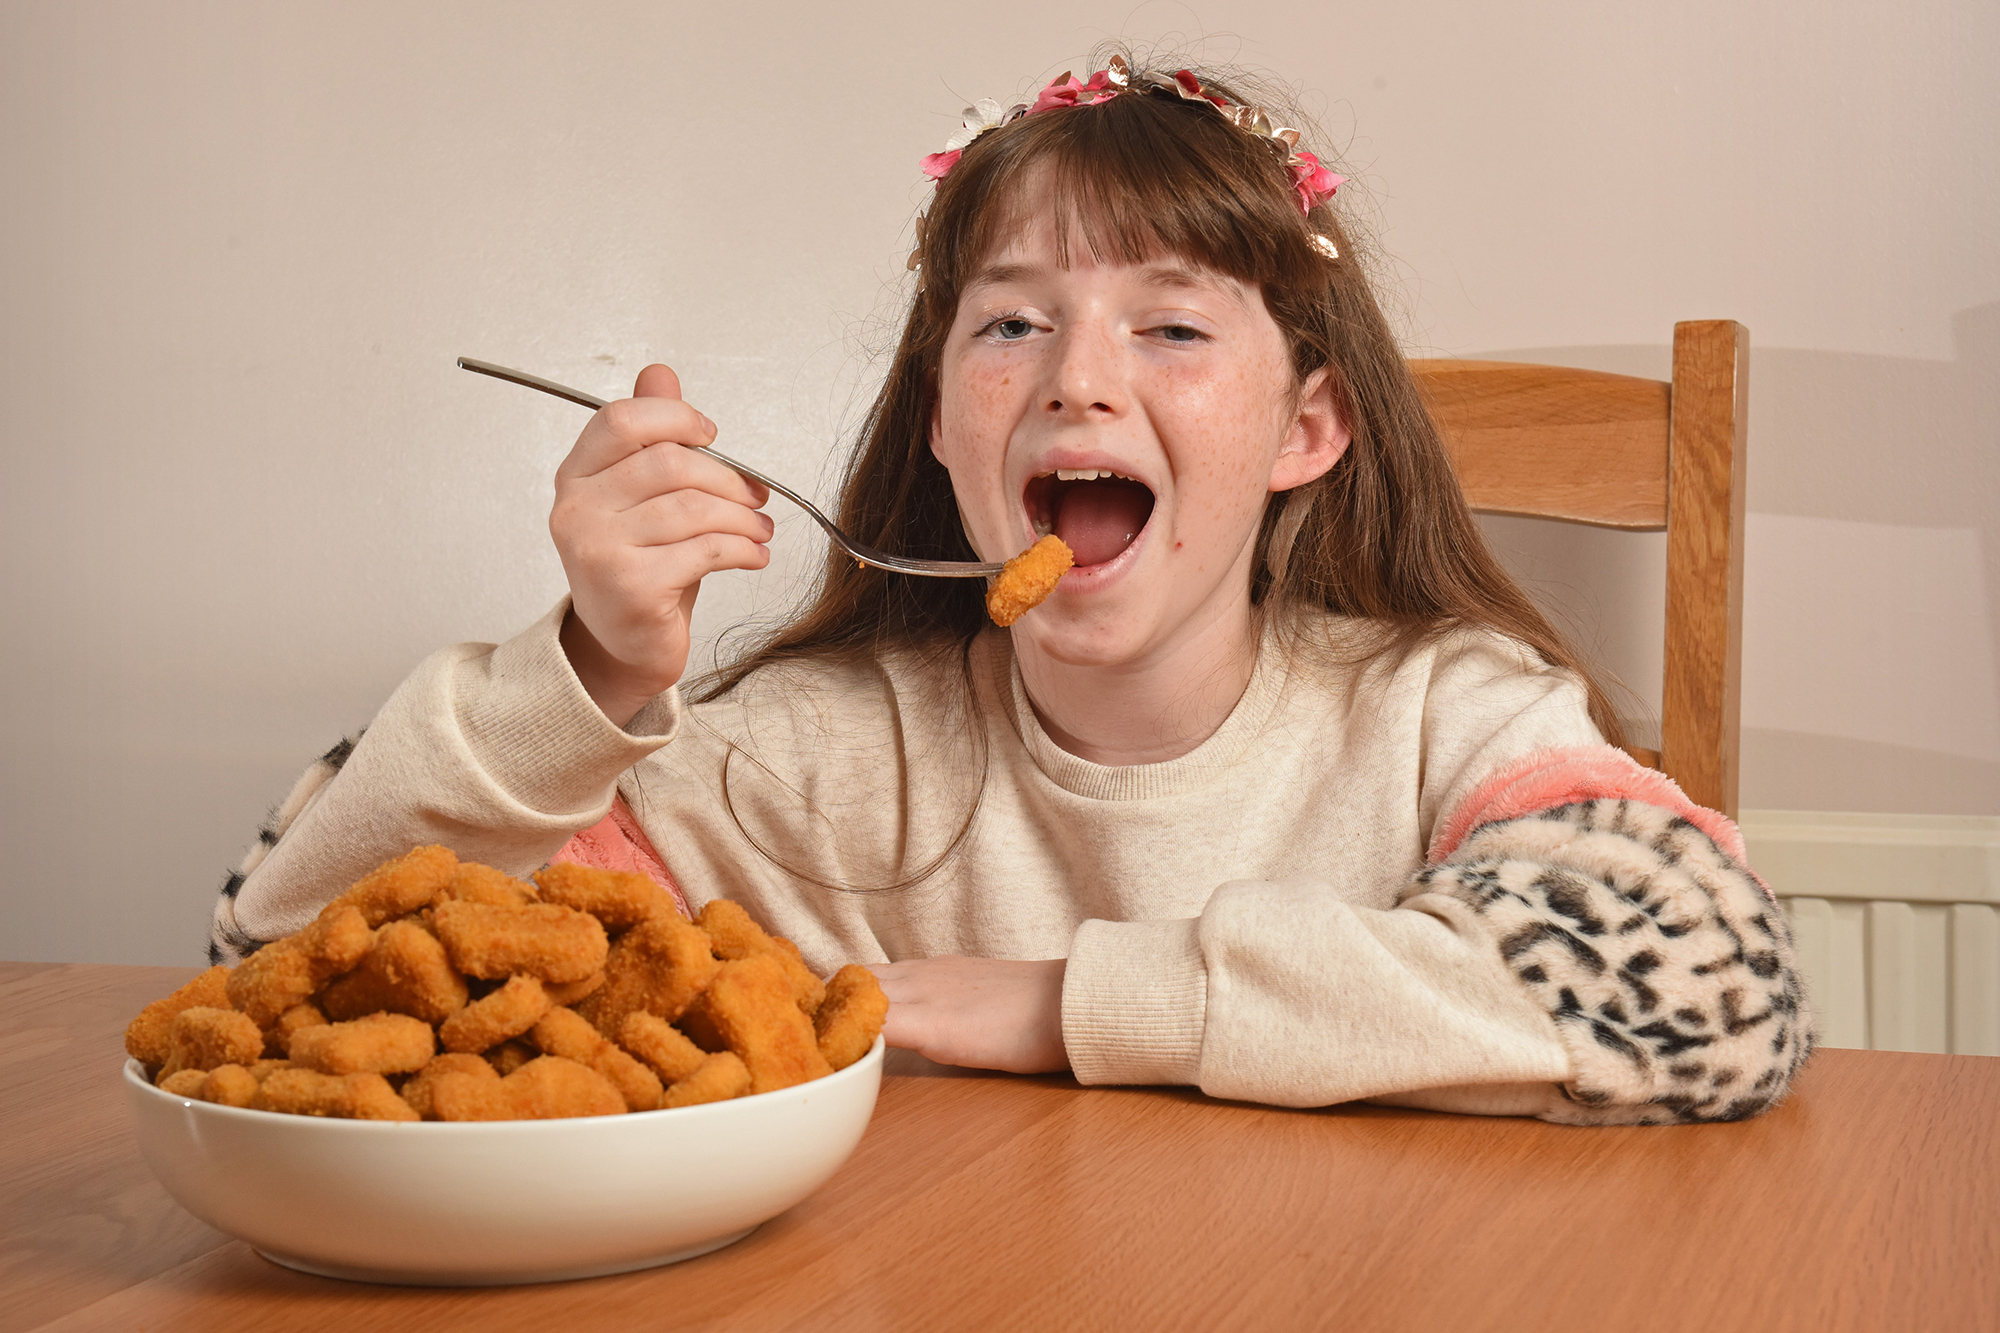 Girl makes 'miracle' recovery after only eating chicken nuggets for a decade